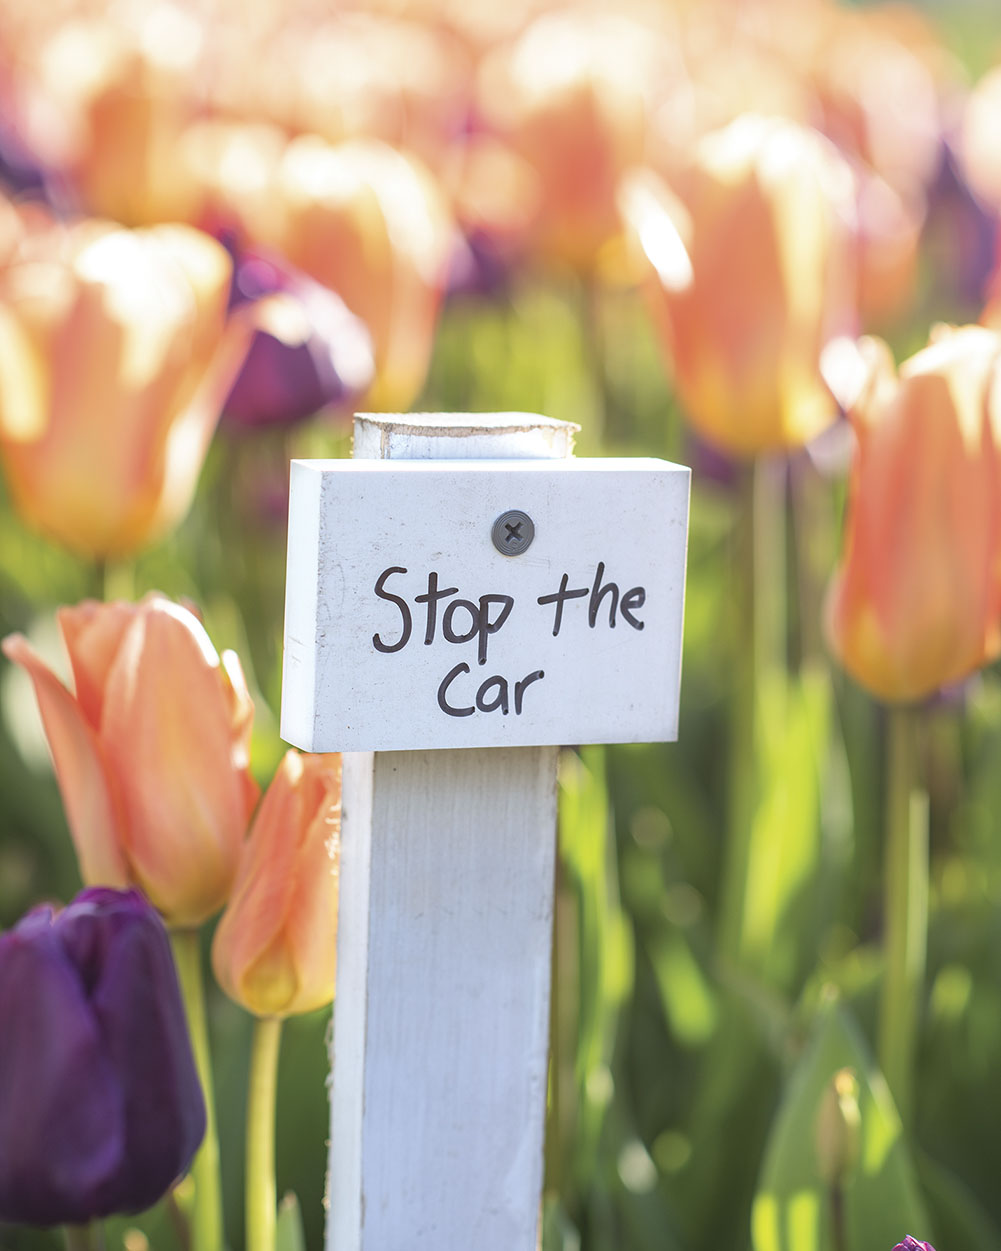 Colorblends “Stop the Car” tulips